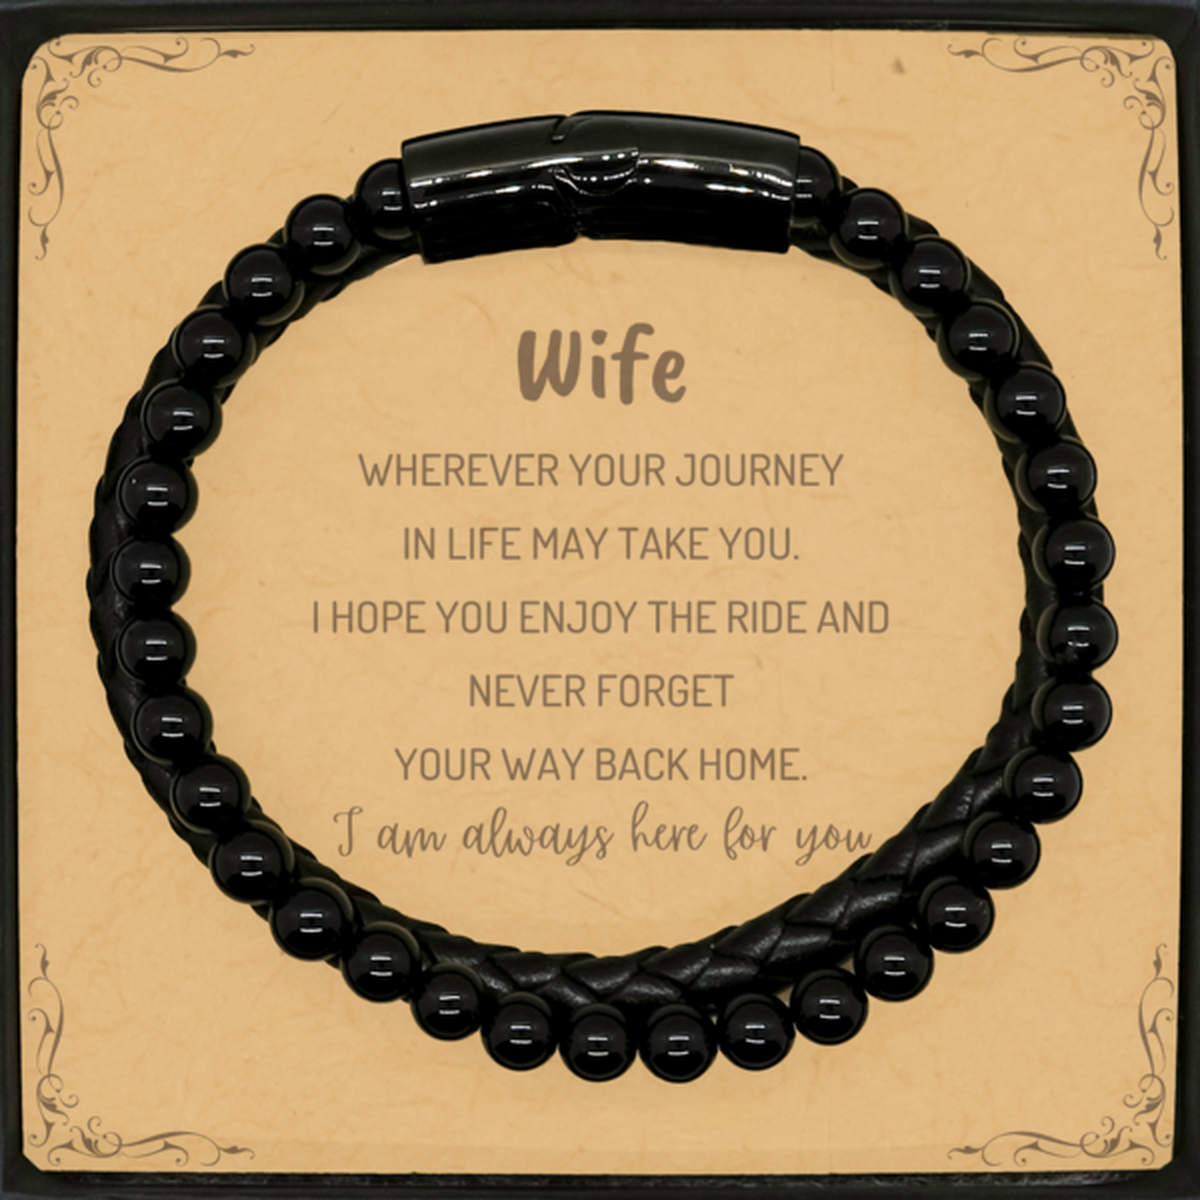 Wife wherever your journey in life may take you, I am always here for you Wife Stone Leather Bracelets, Awesome Christmas Gifts For Wife Message Card, Wife Birthday Gifts for Men Women Family Loved One